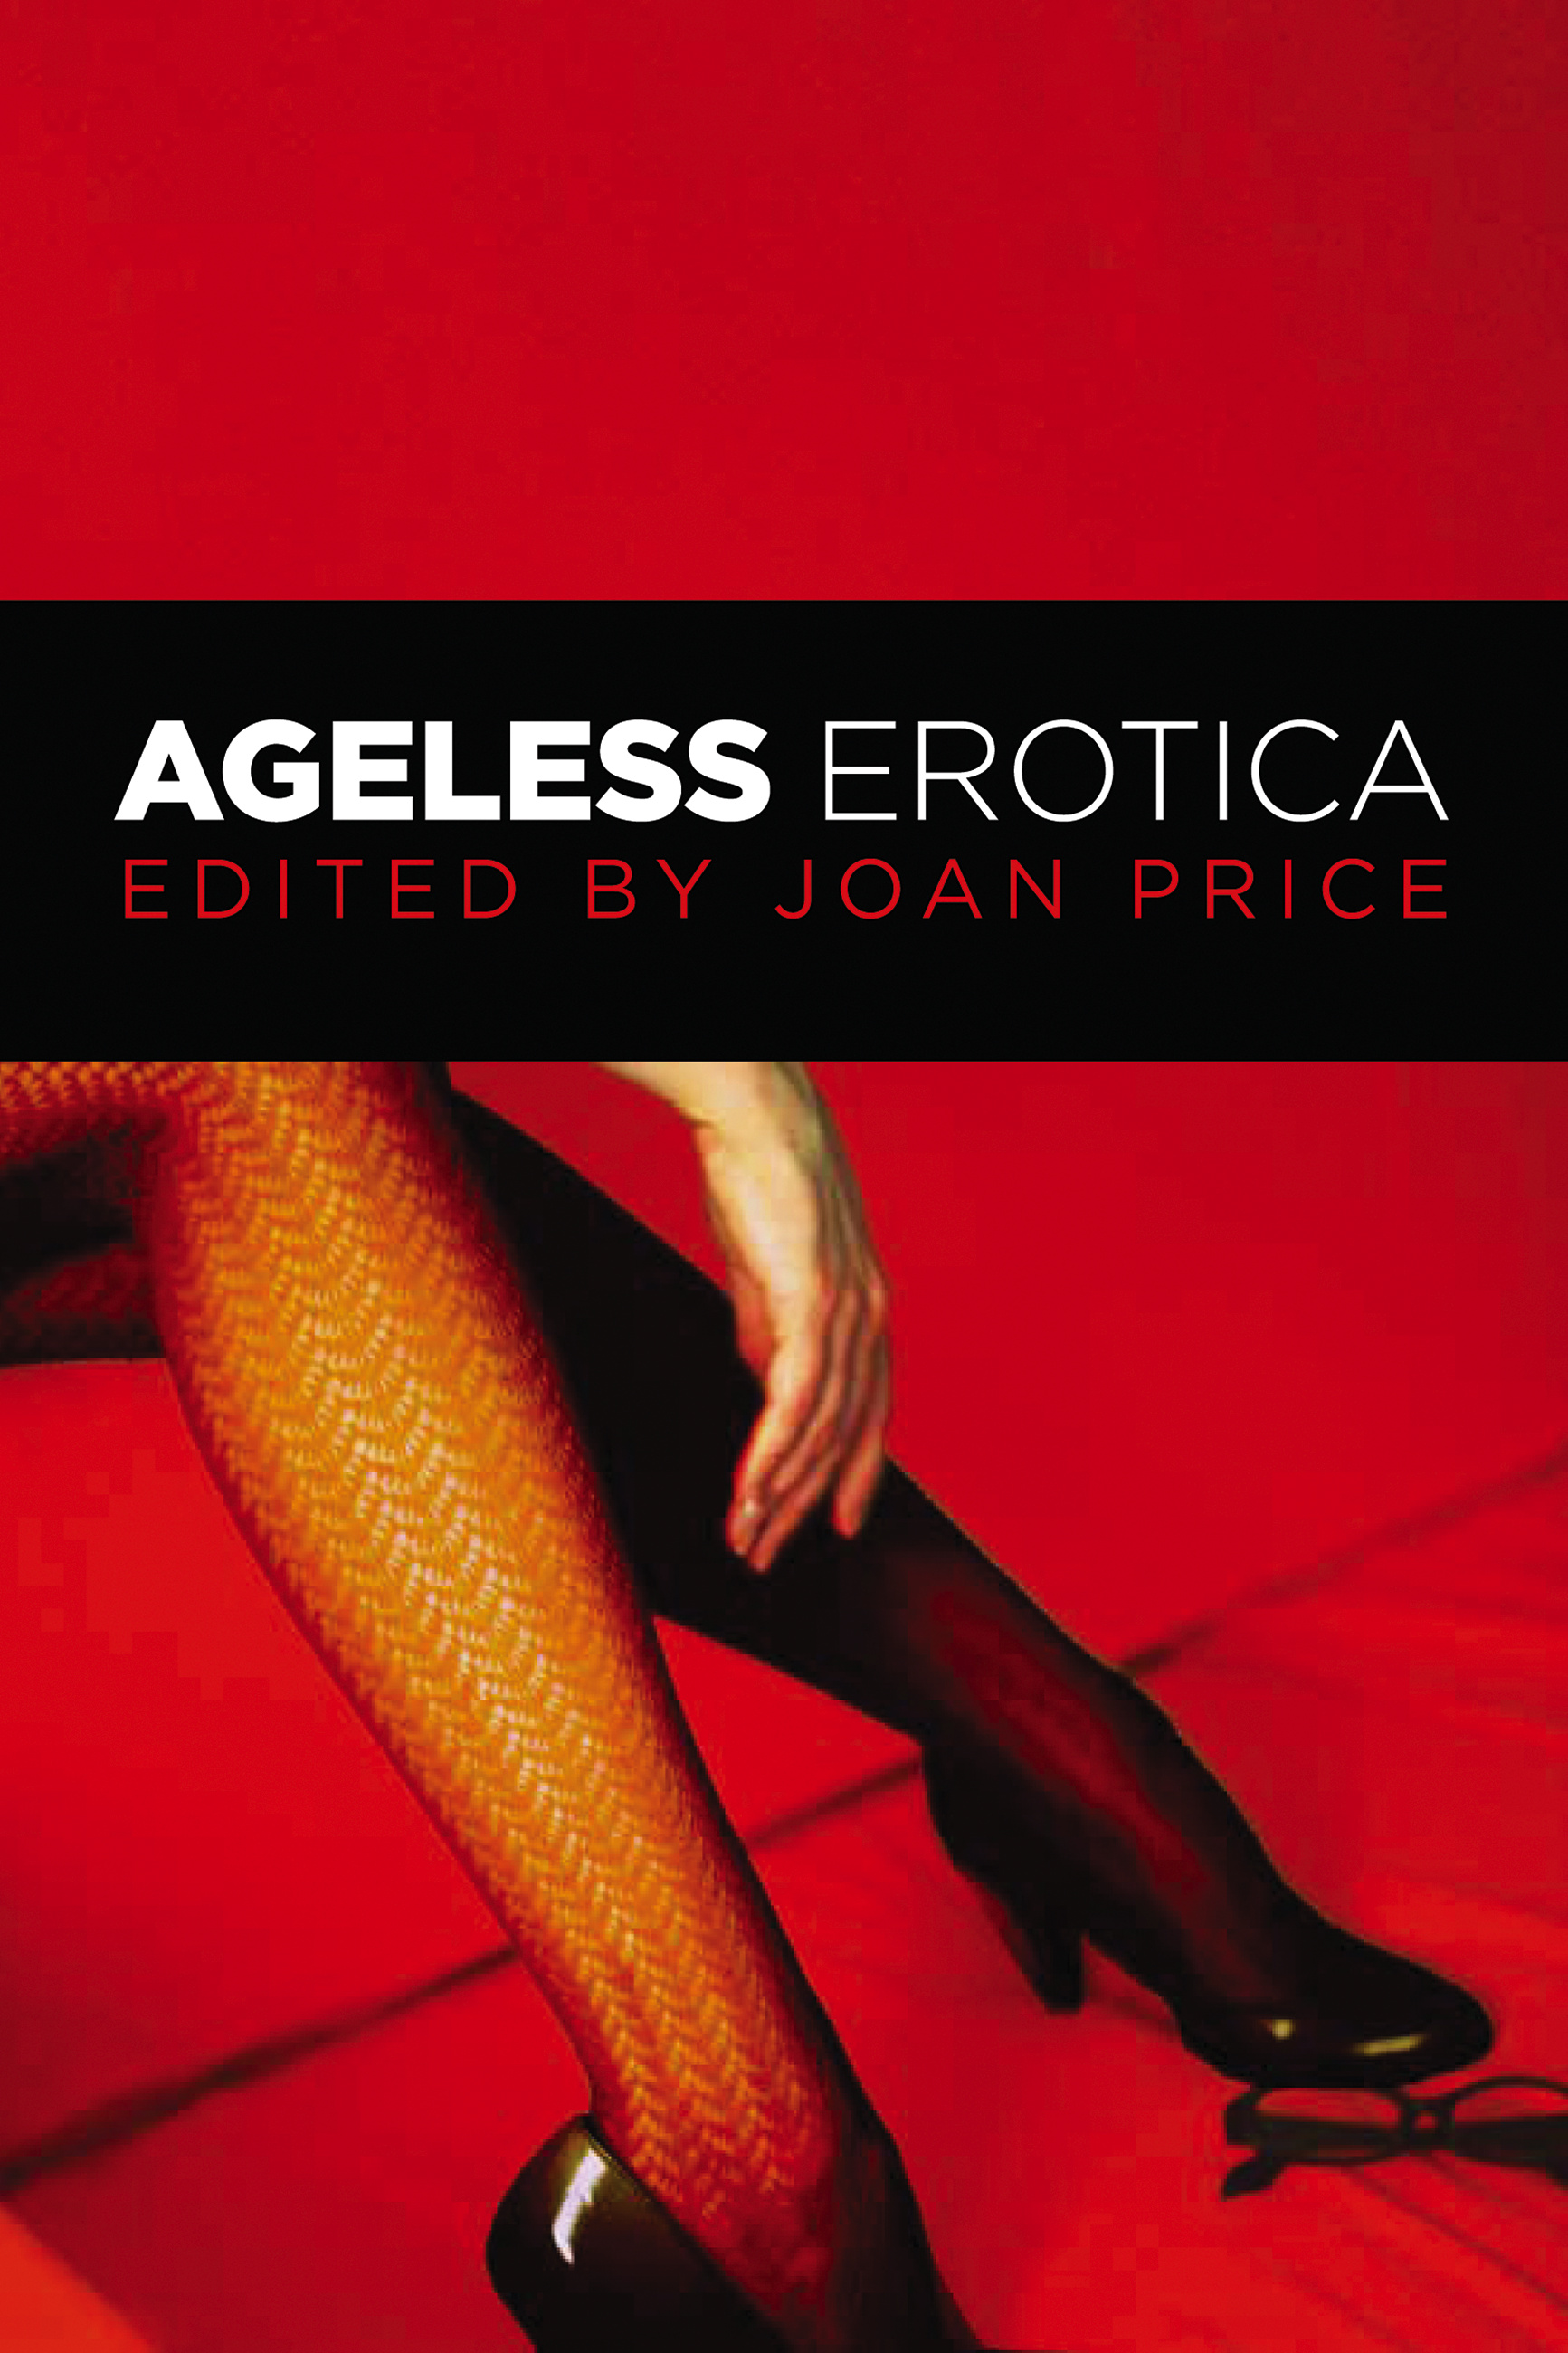 Ageless Erotica by Joan Price Hachette Book Group